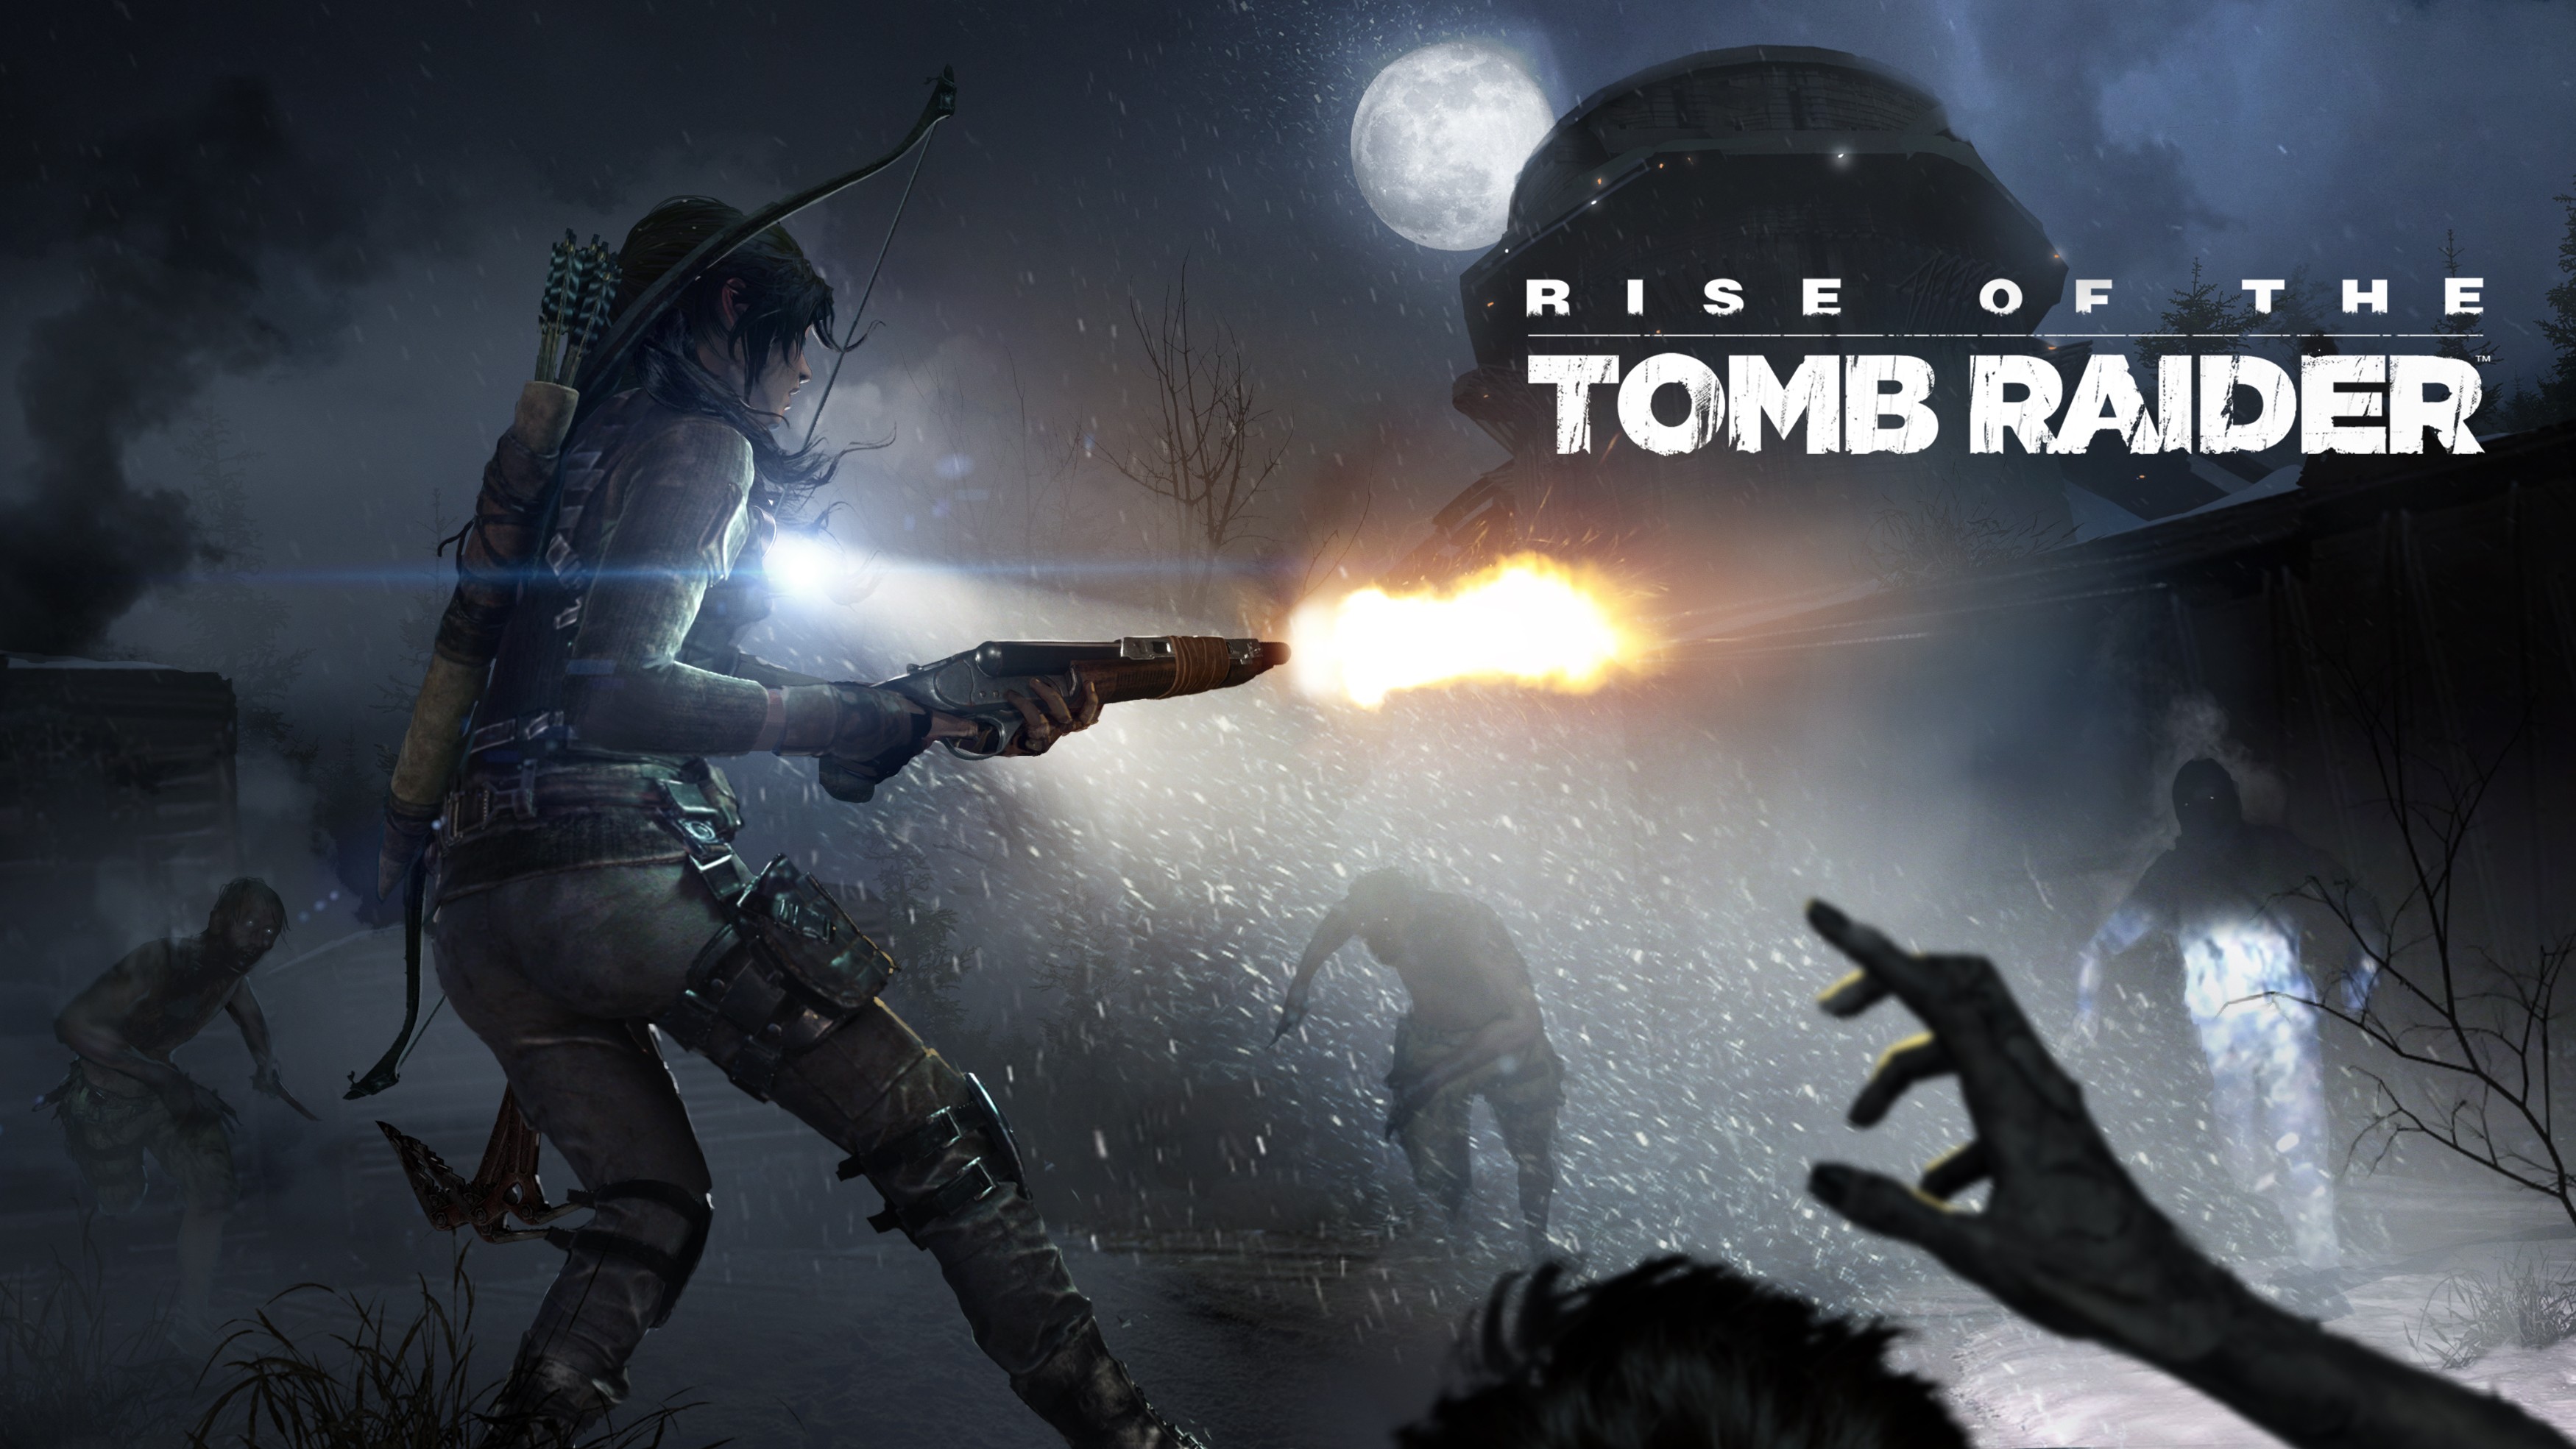 Rise of the Tomb Raider, DLC, Zombies, PC gaming Wallpaper